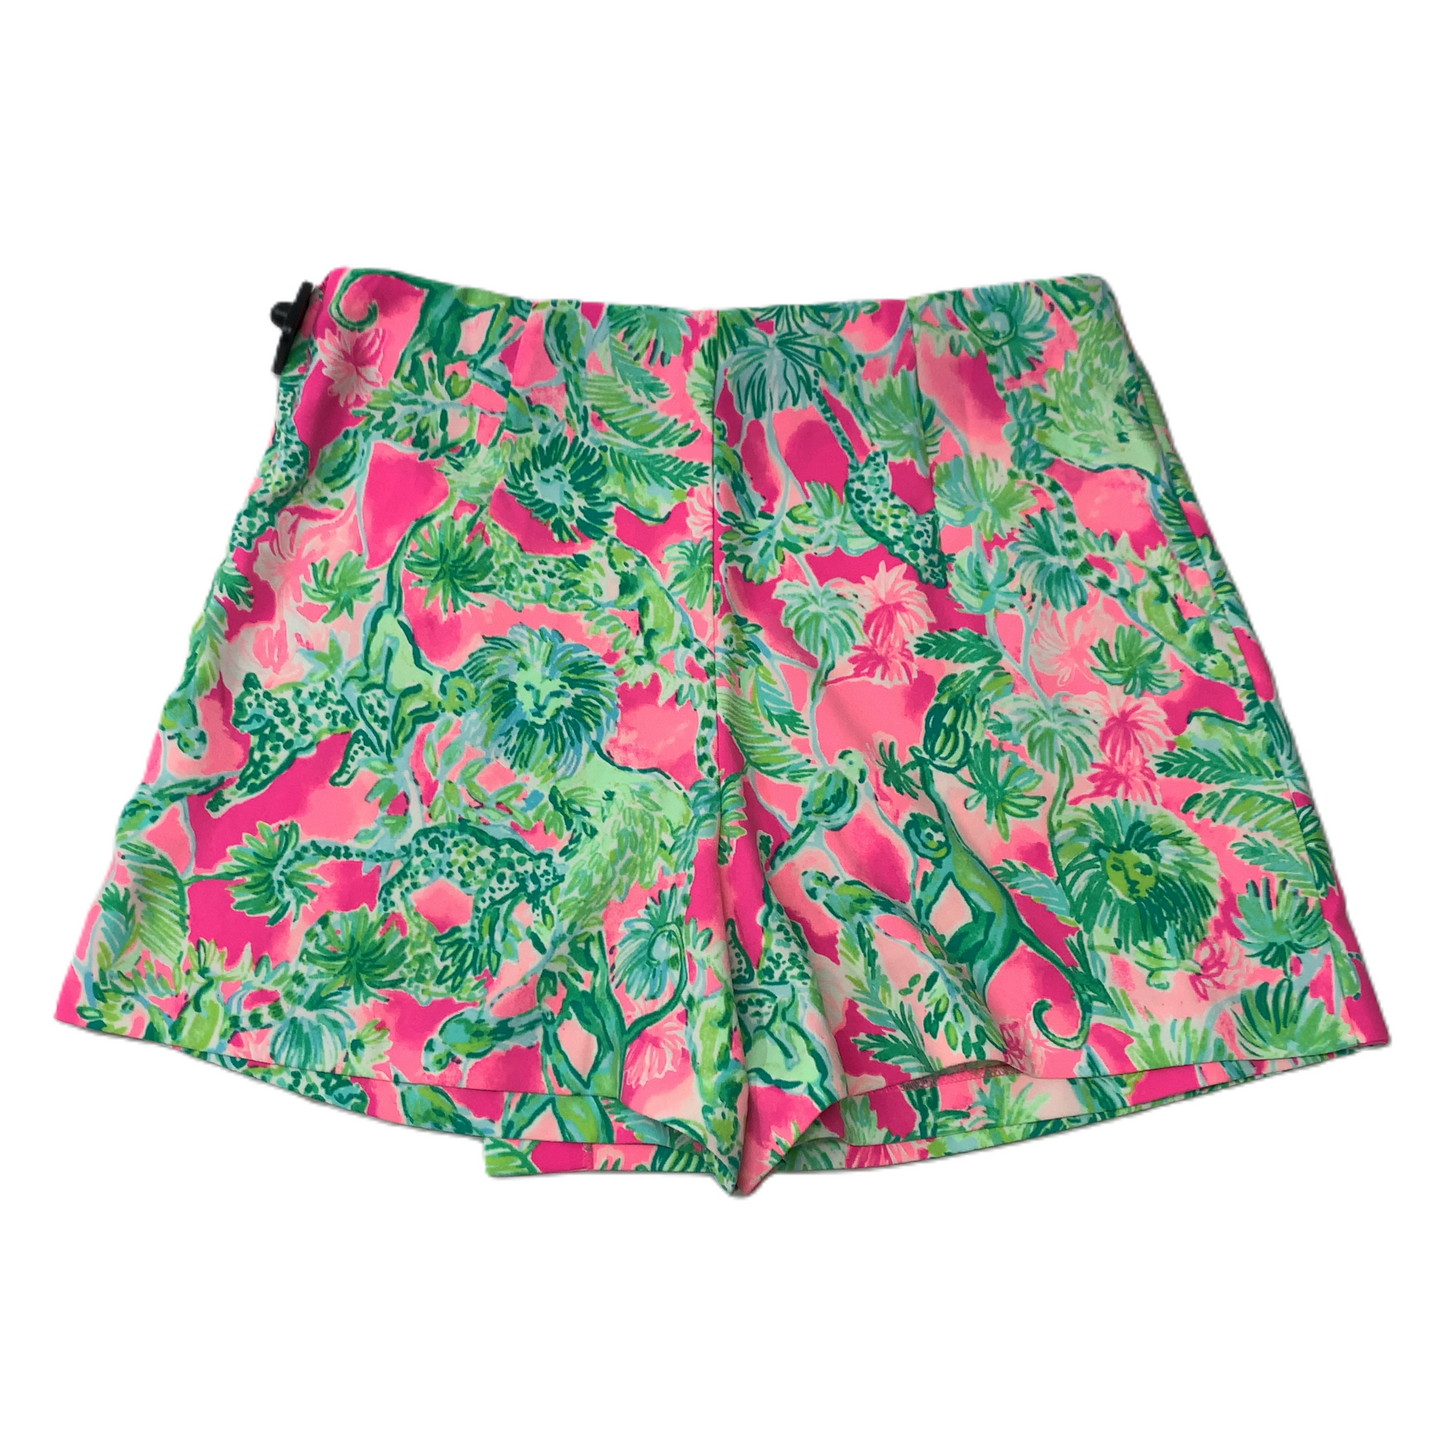 Green & Pink  Skirt Designer By Lilly Pulitzer  Size: L